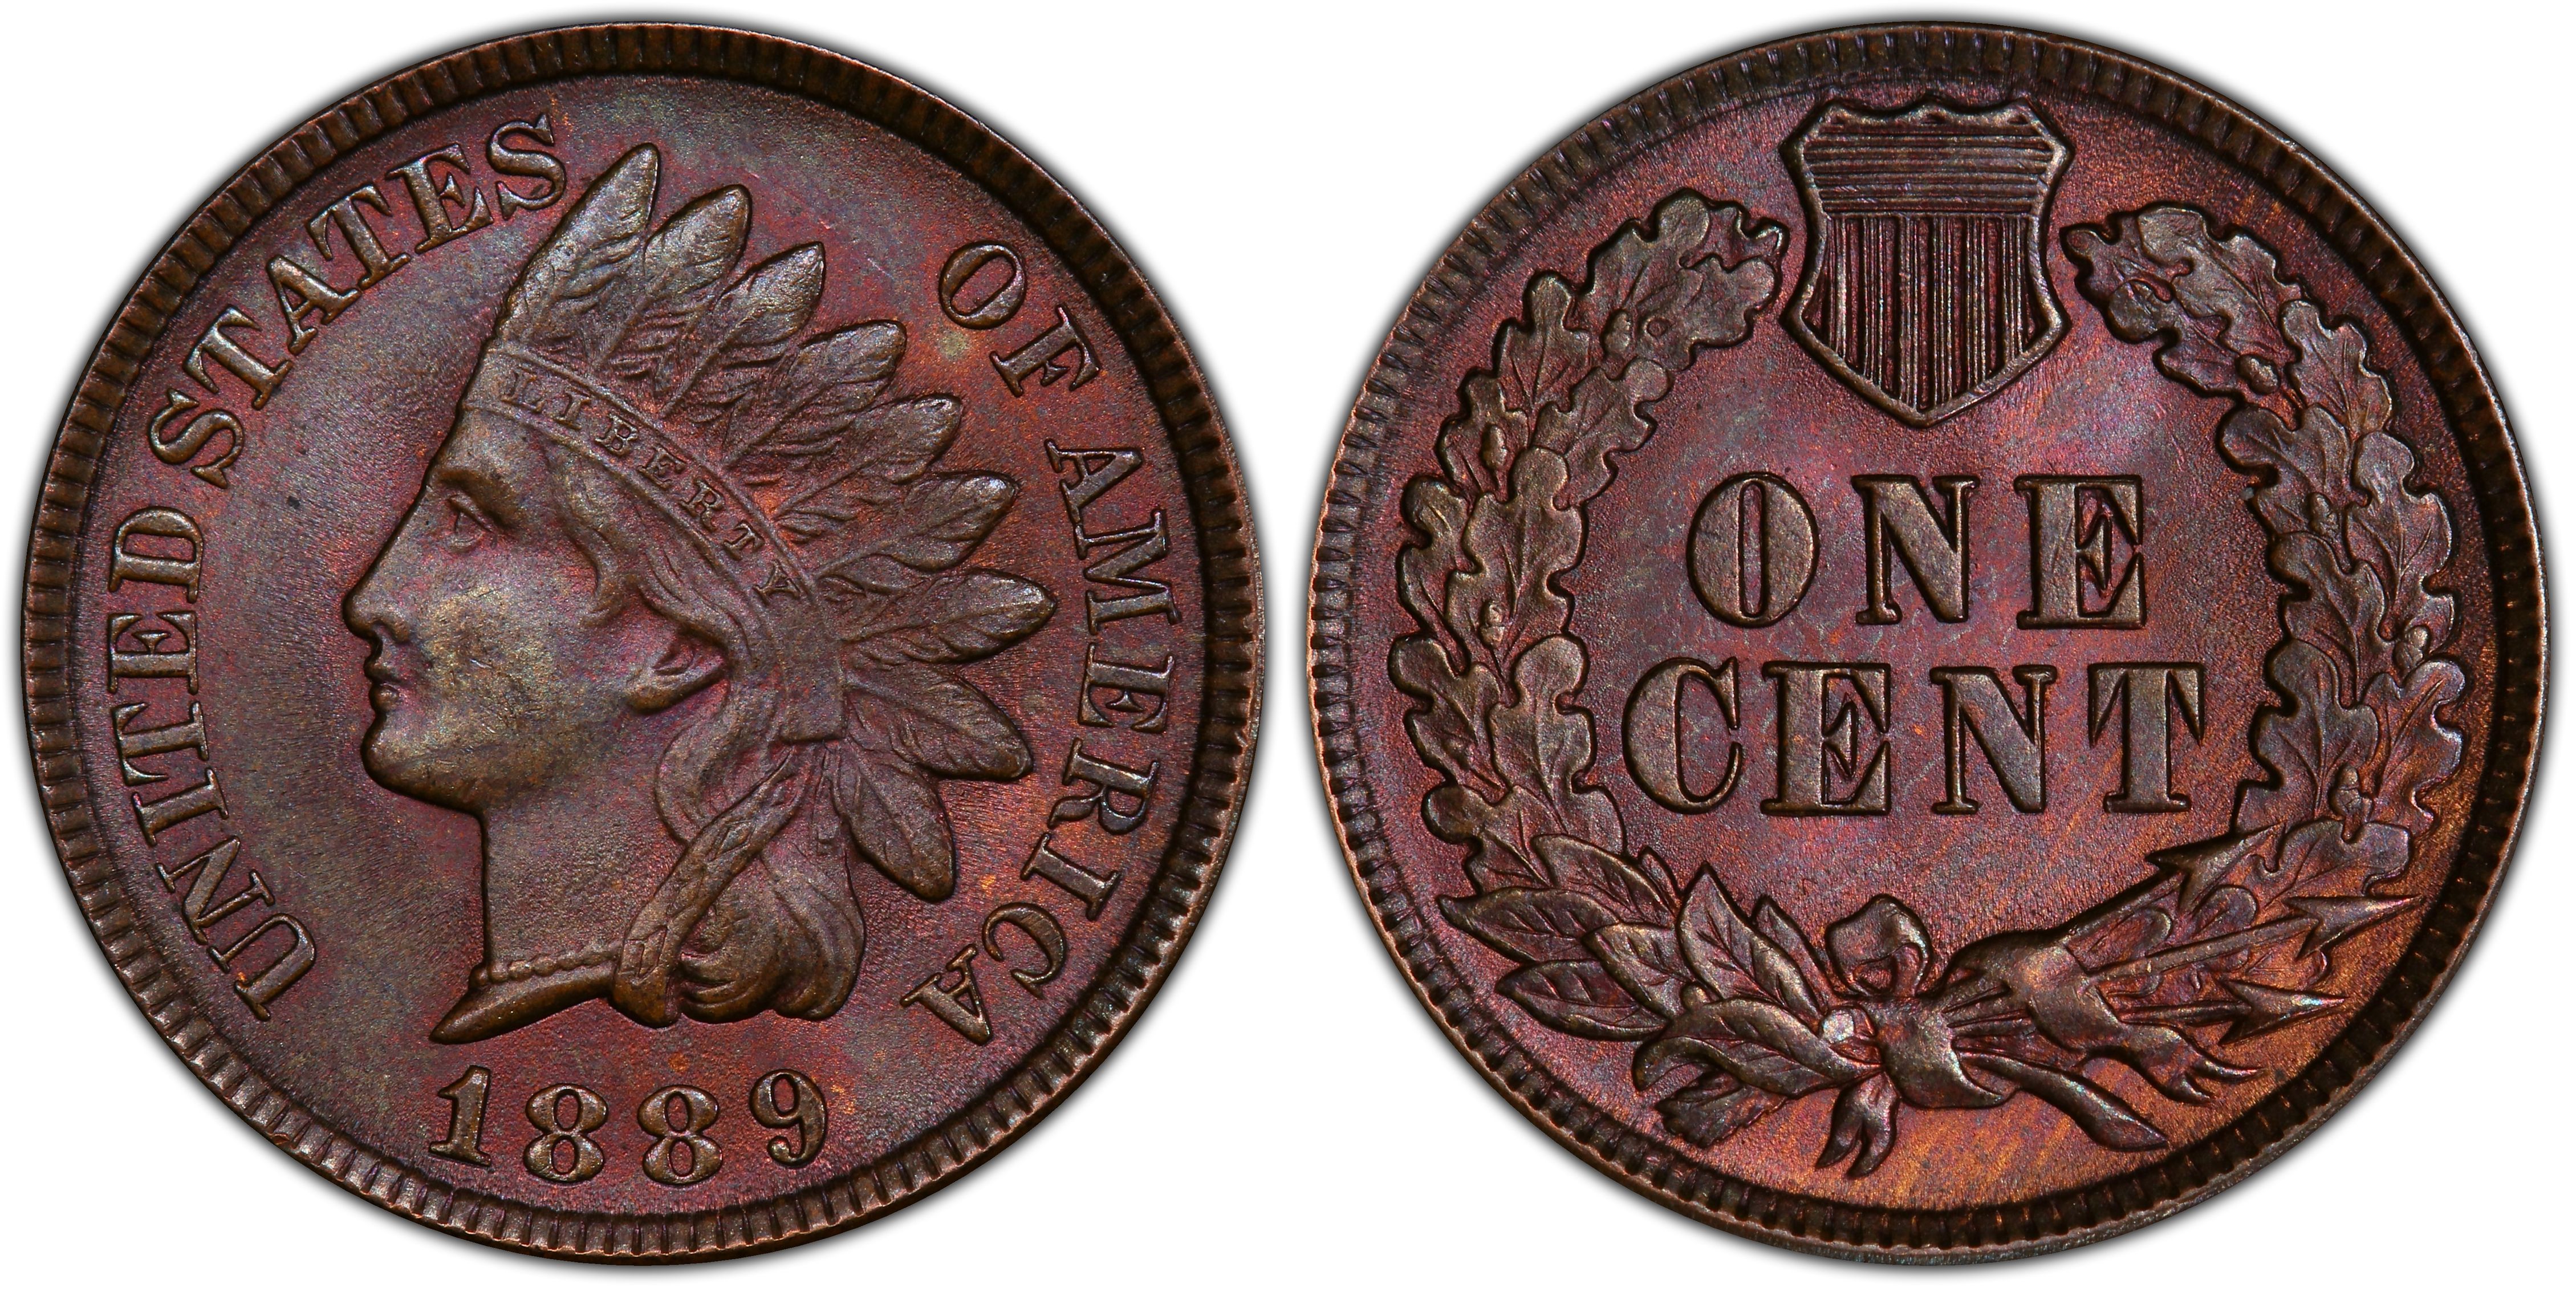 UNITED STATES 1889 INDIAN HEAD ONE CENT Very Good